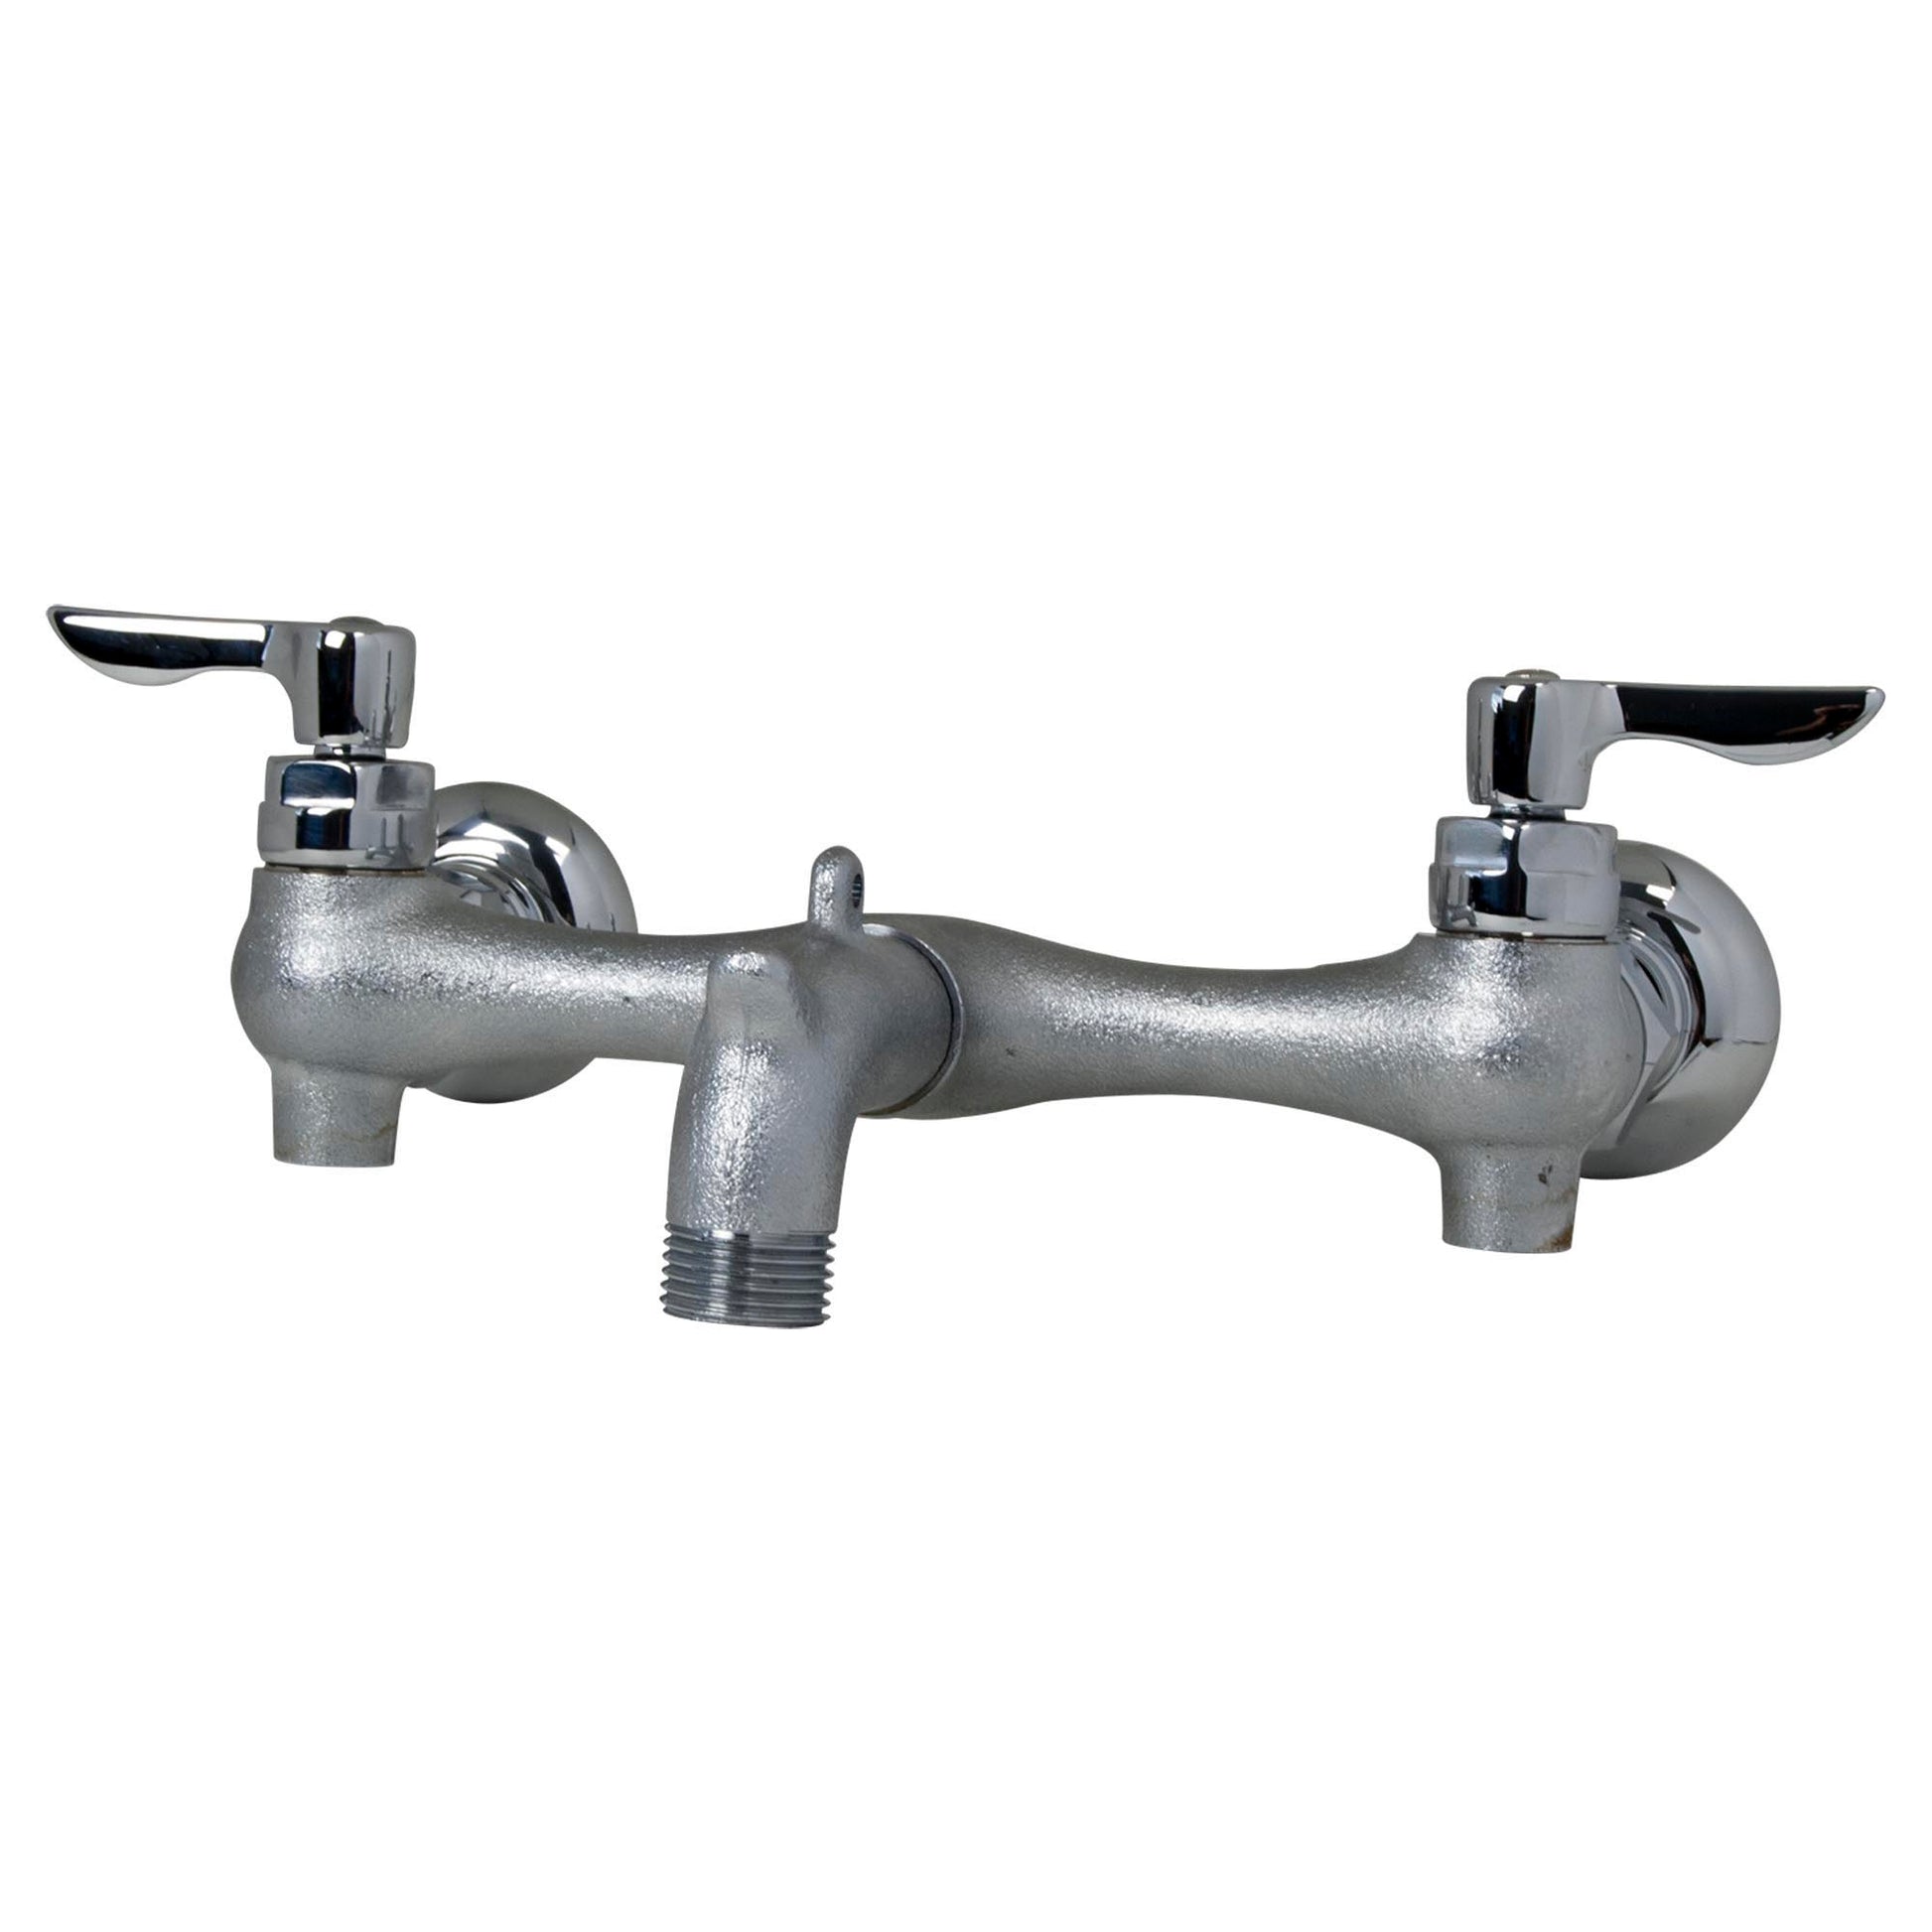 AMERICAN-STANDARD 8350235.004, Wall-Mount Service Sink Faucet With 3-Inch Spout in Rough Chrome